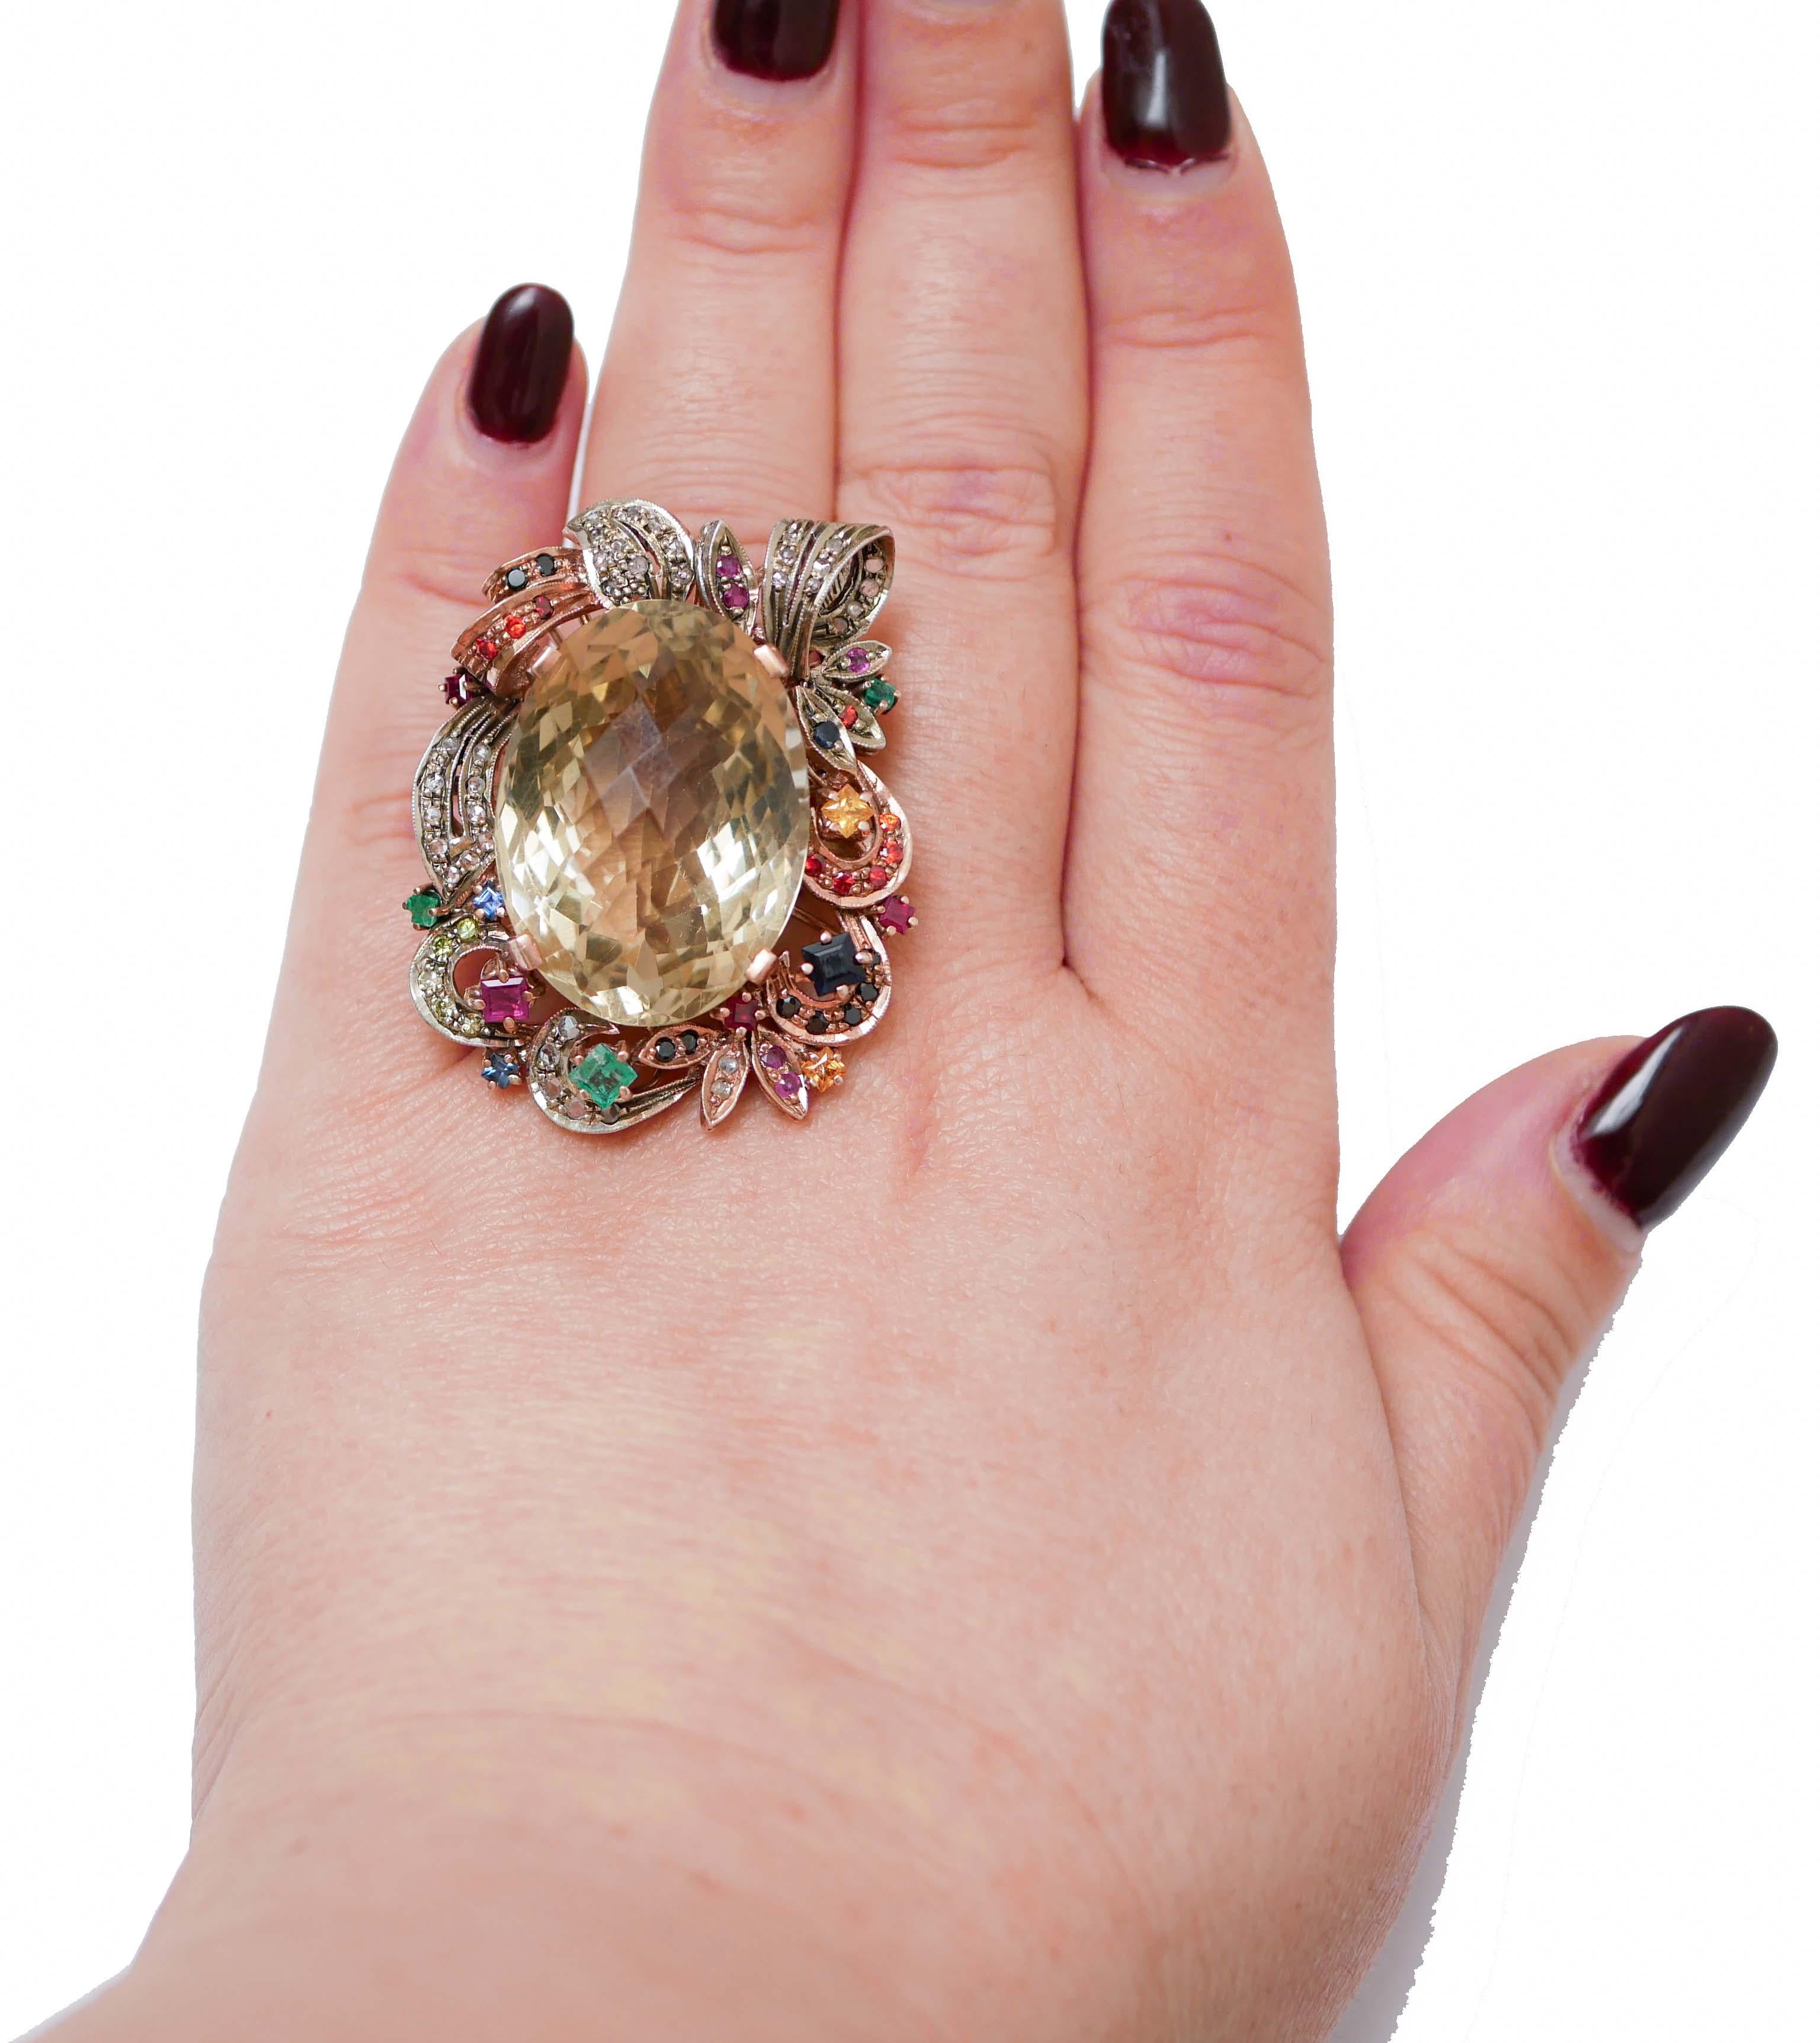 Mixed Cut Topaz, Emeralds, Rubies, Sapphires, Diamonds, Rose Gold and Silver Ring. For Sale